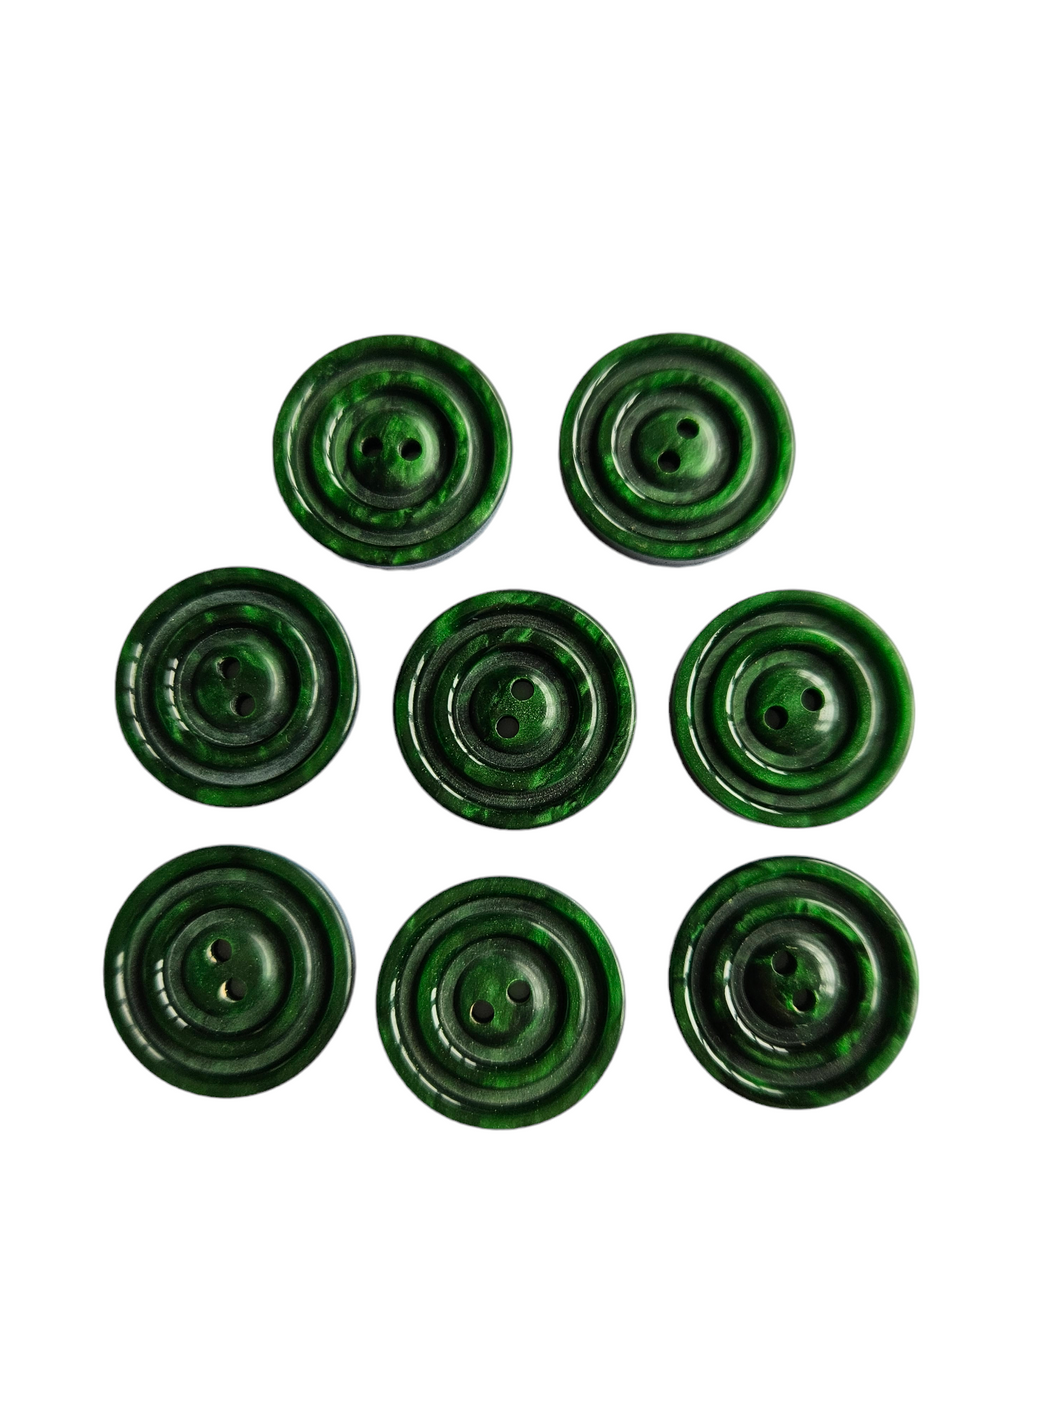 1940s Green Marbled Buttons